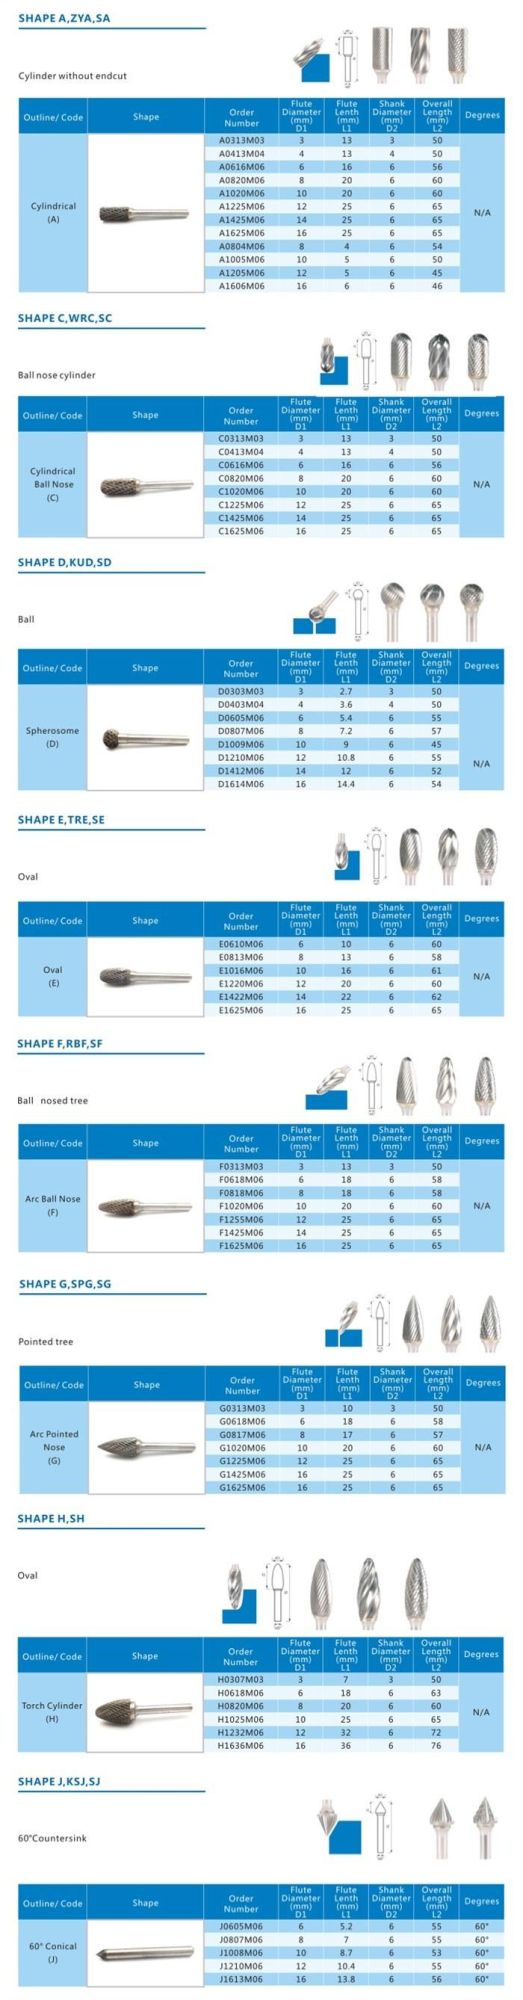 1/8′′ Shank Solid Carbide Burrs, Rotary Cutters, Rotary Files with 3mm, 6mm, 8mm, 10mm, 12mm, 16mm Shank Diameter with Single or Double Cutters